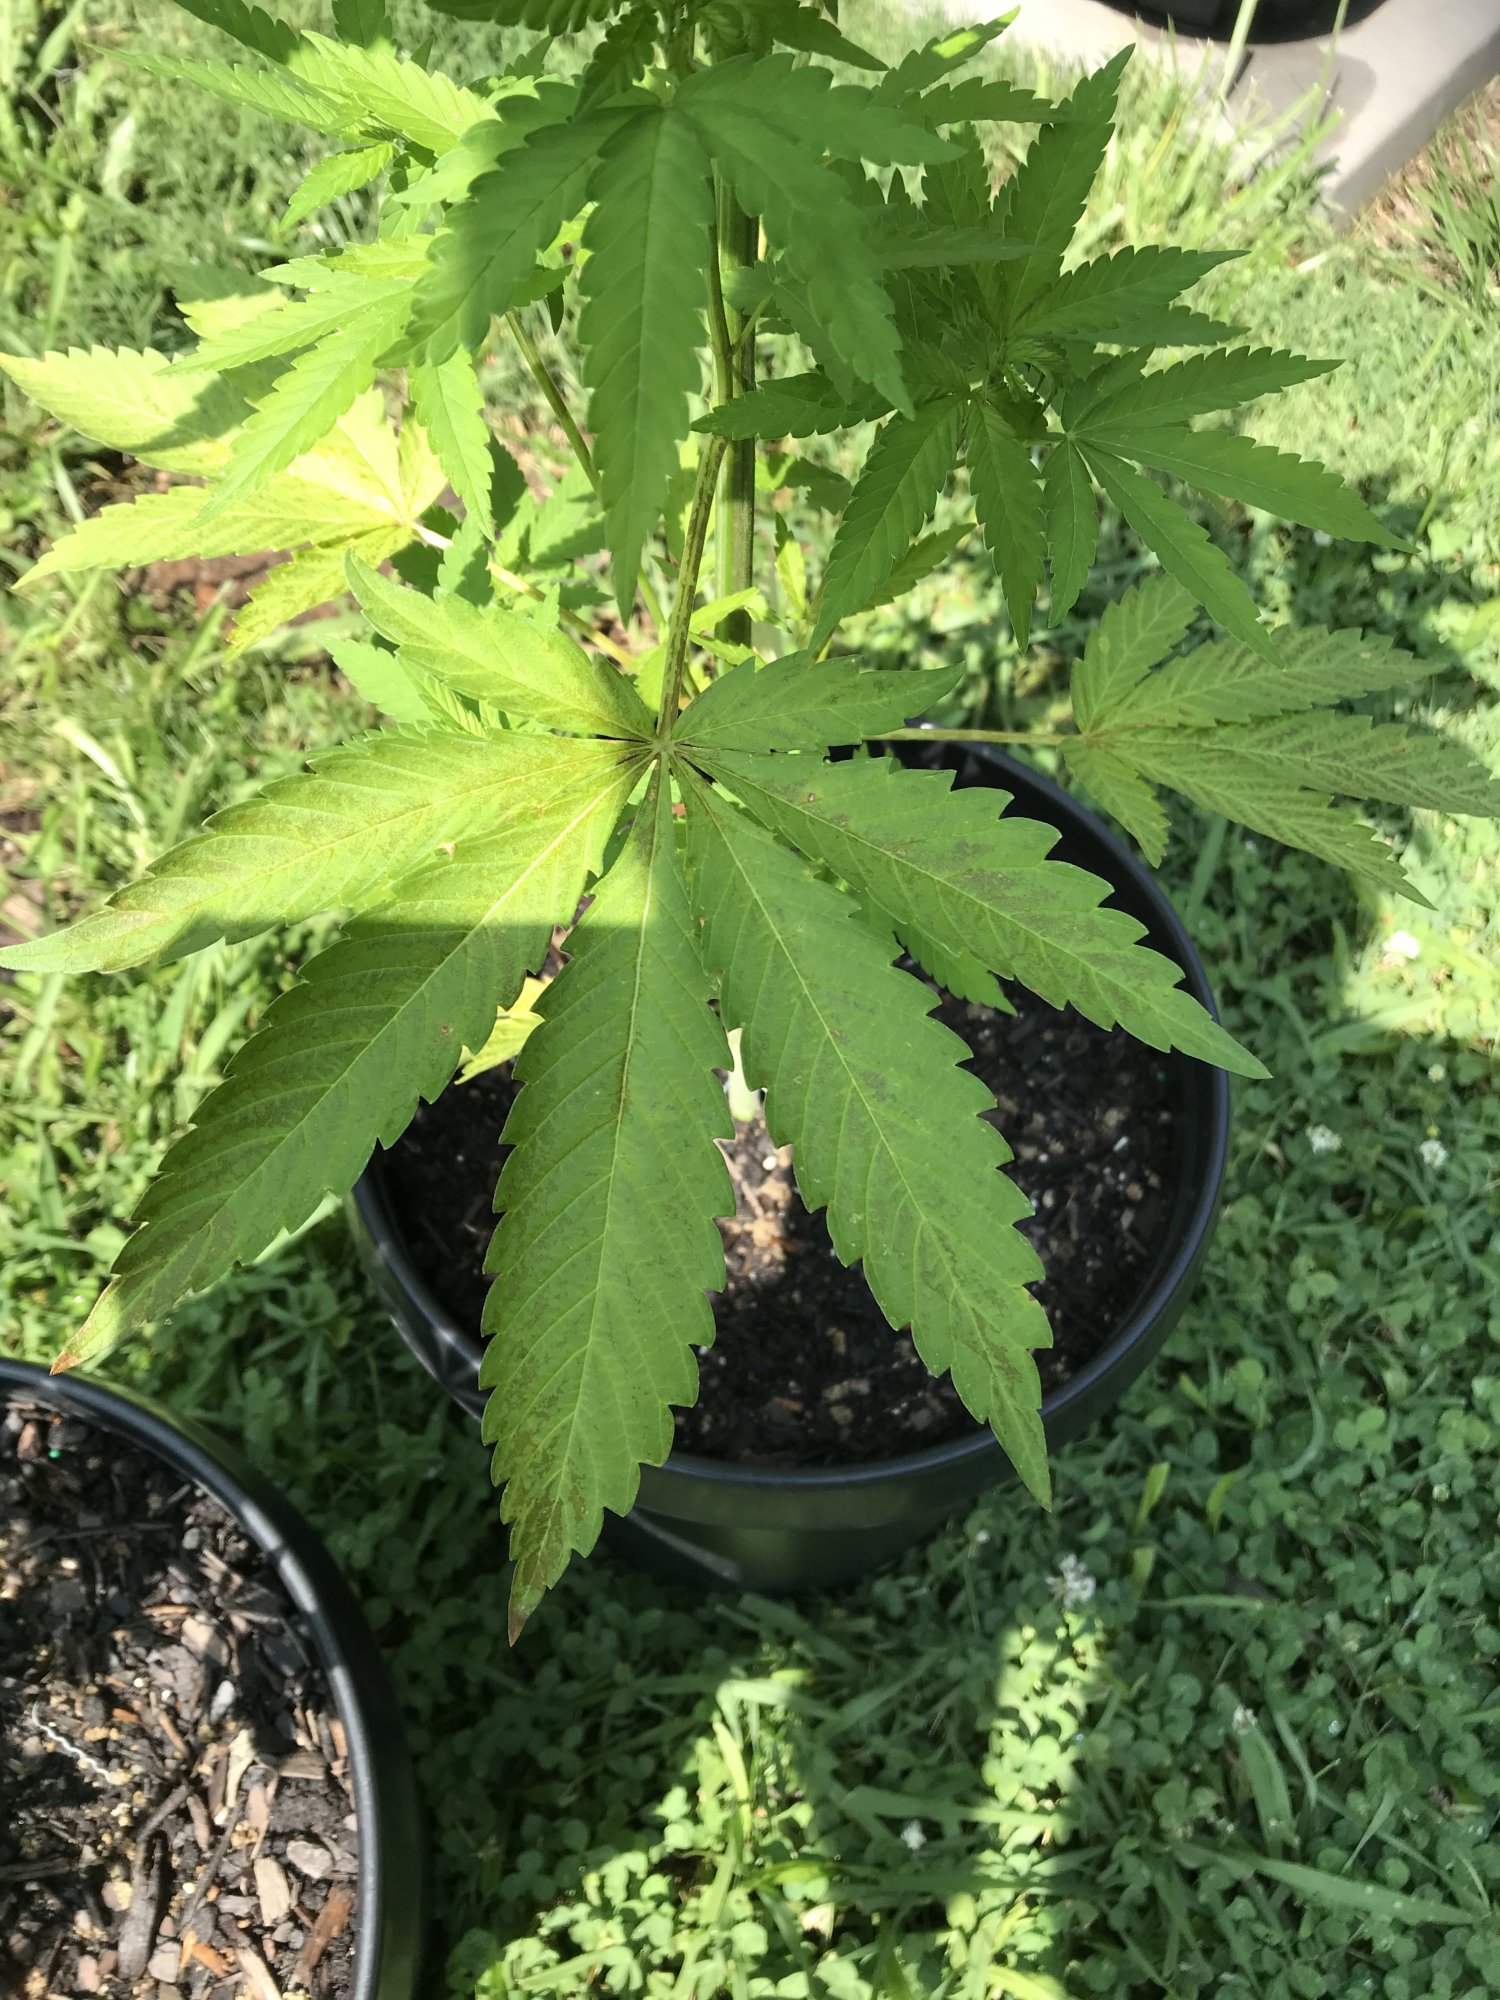 Help a young grower understand